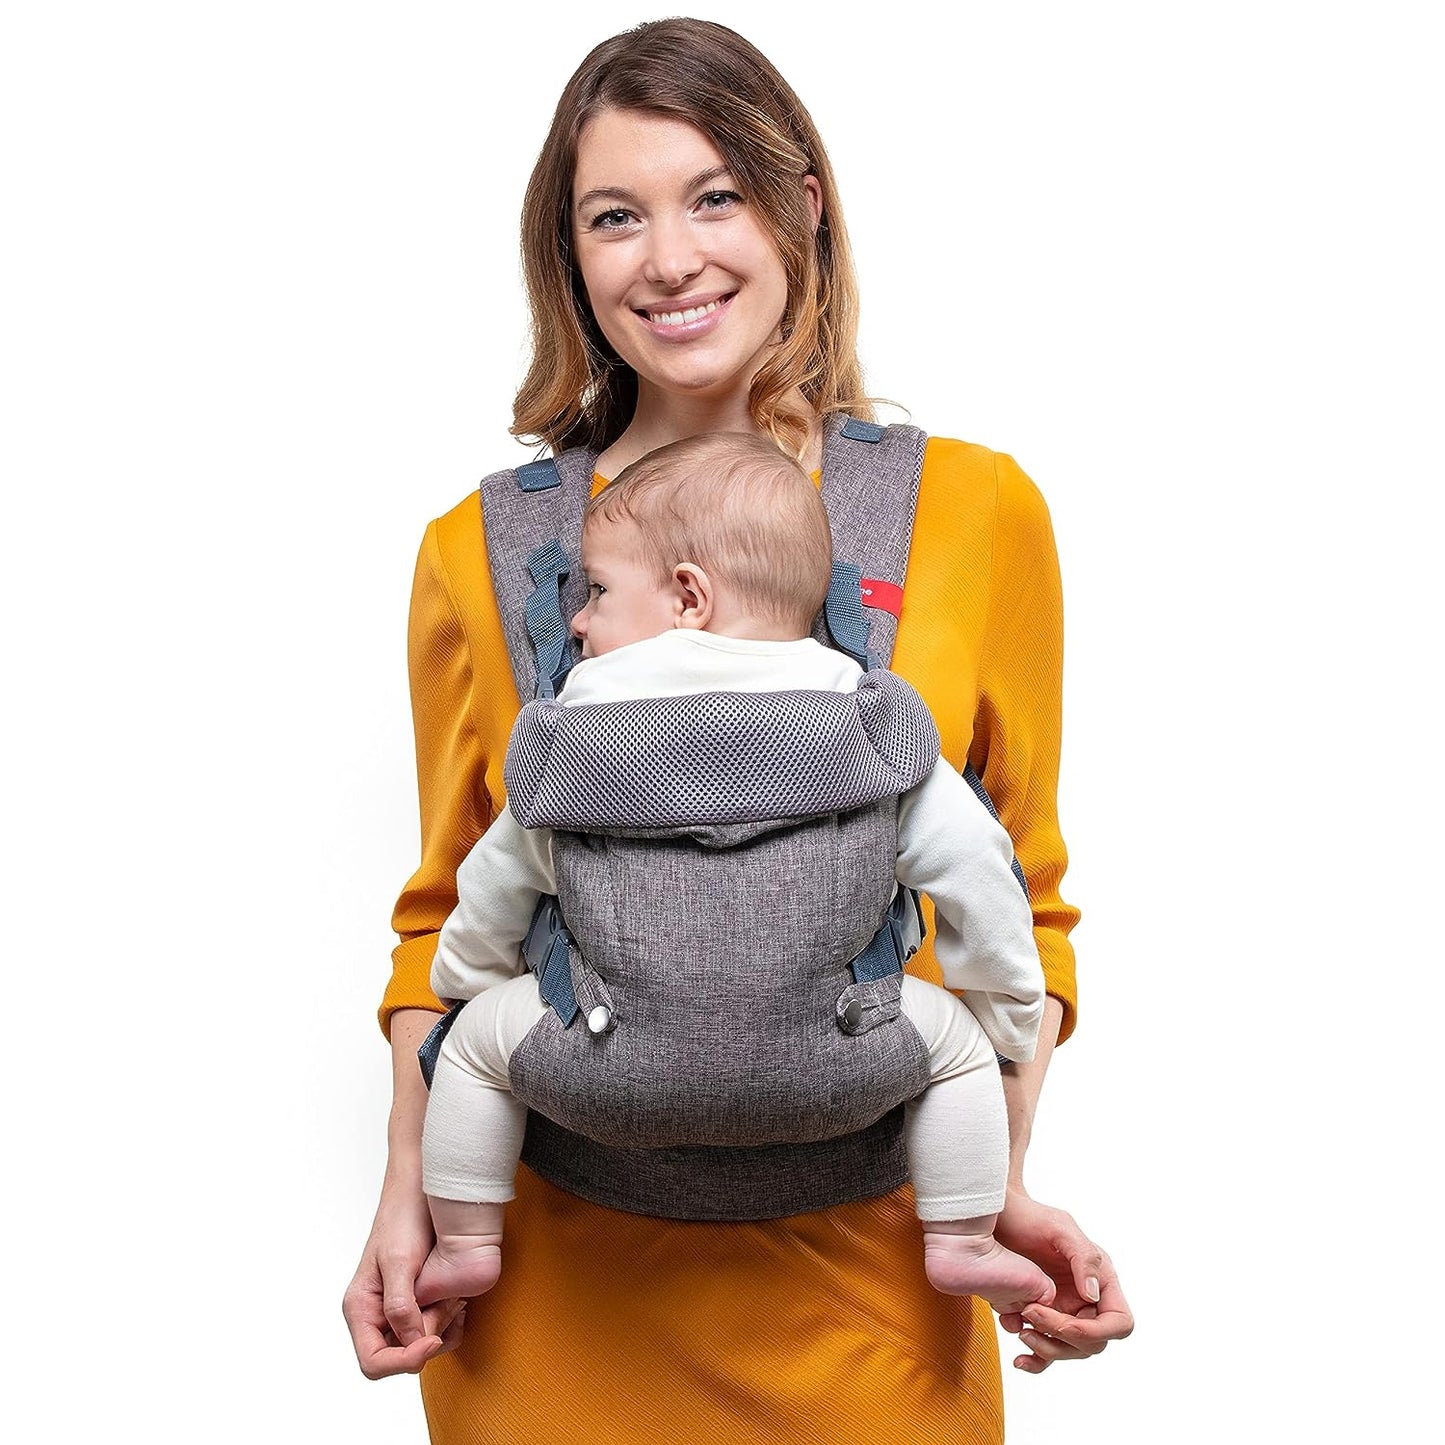 New You+Me 4-in-1 Baby Carrier Newborn to Toddler - Grey Mesh